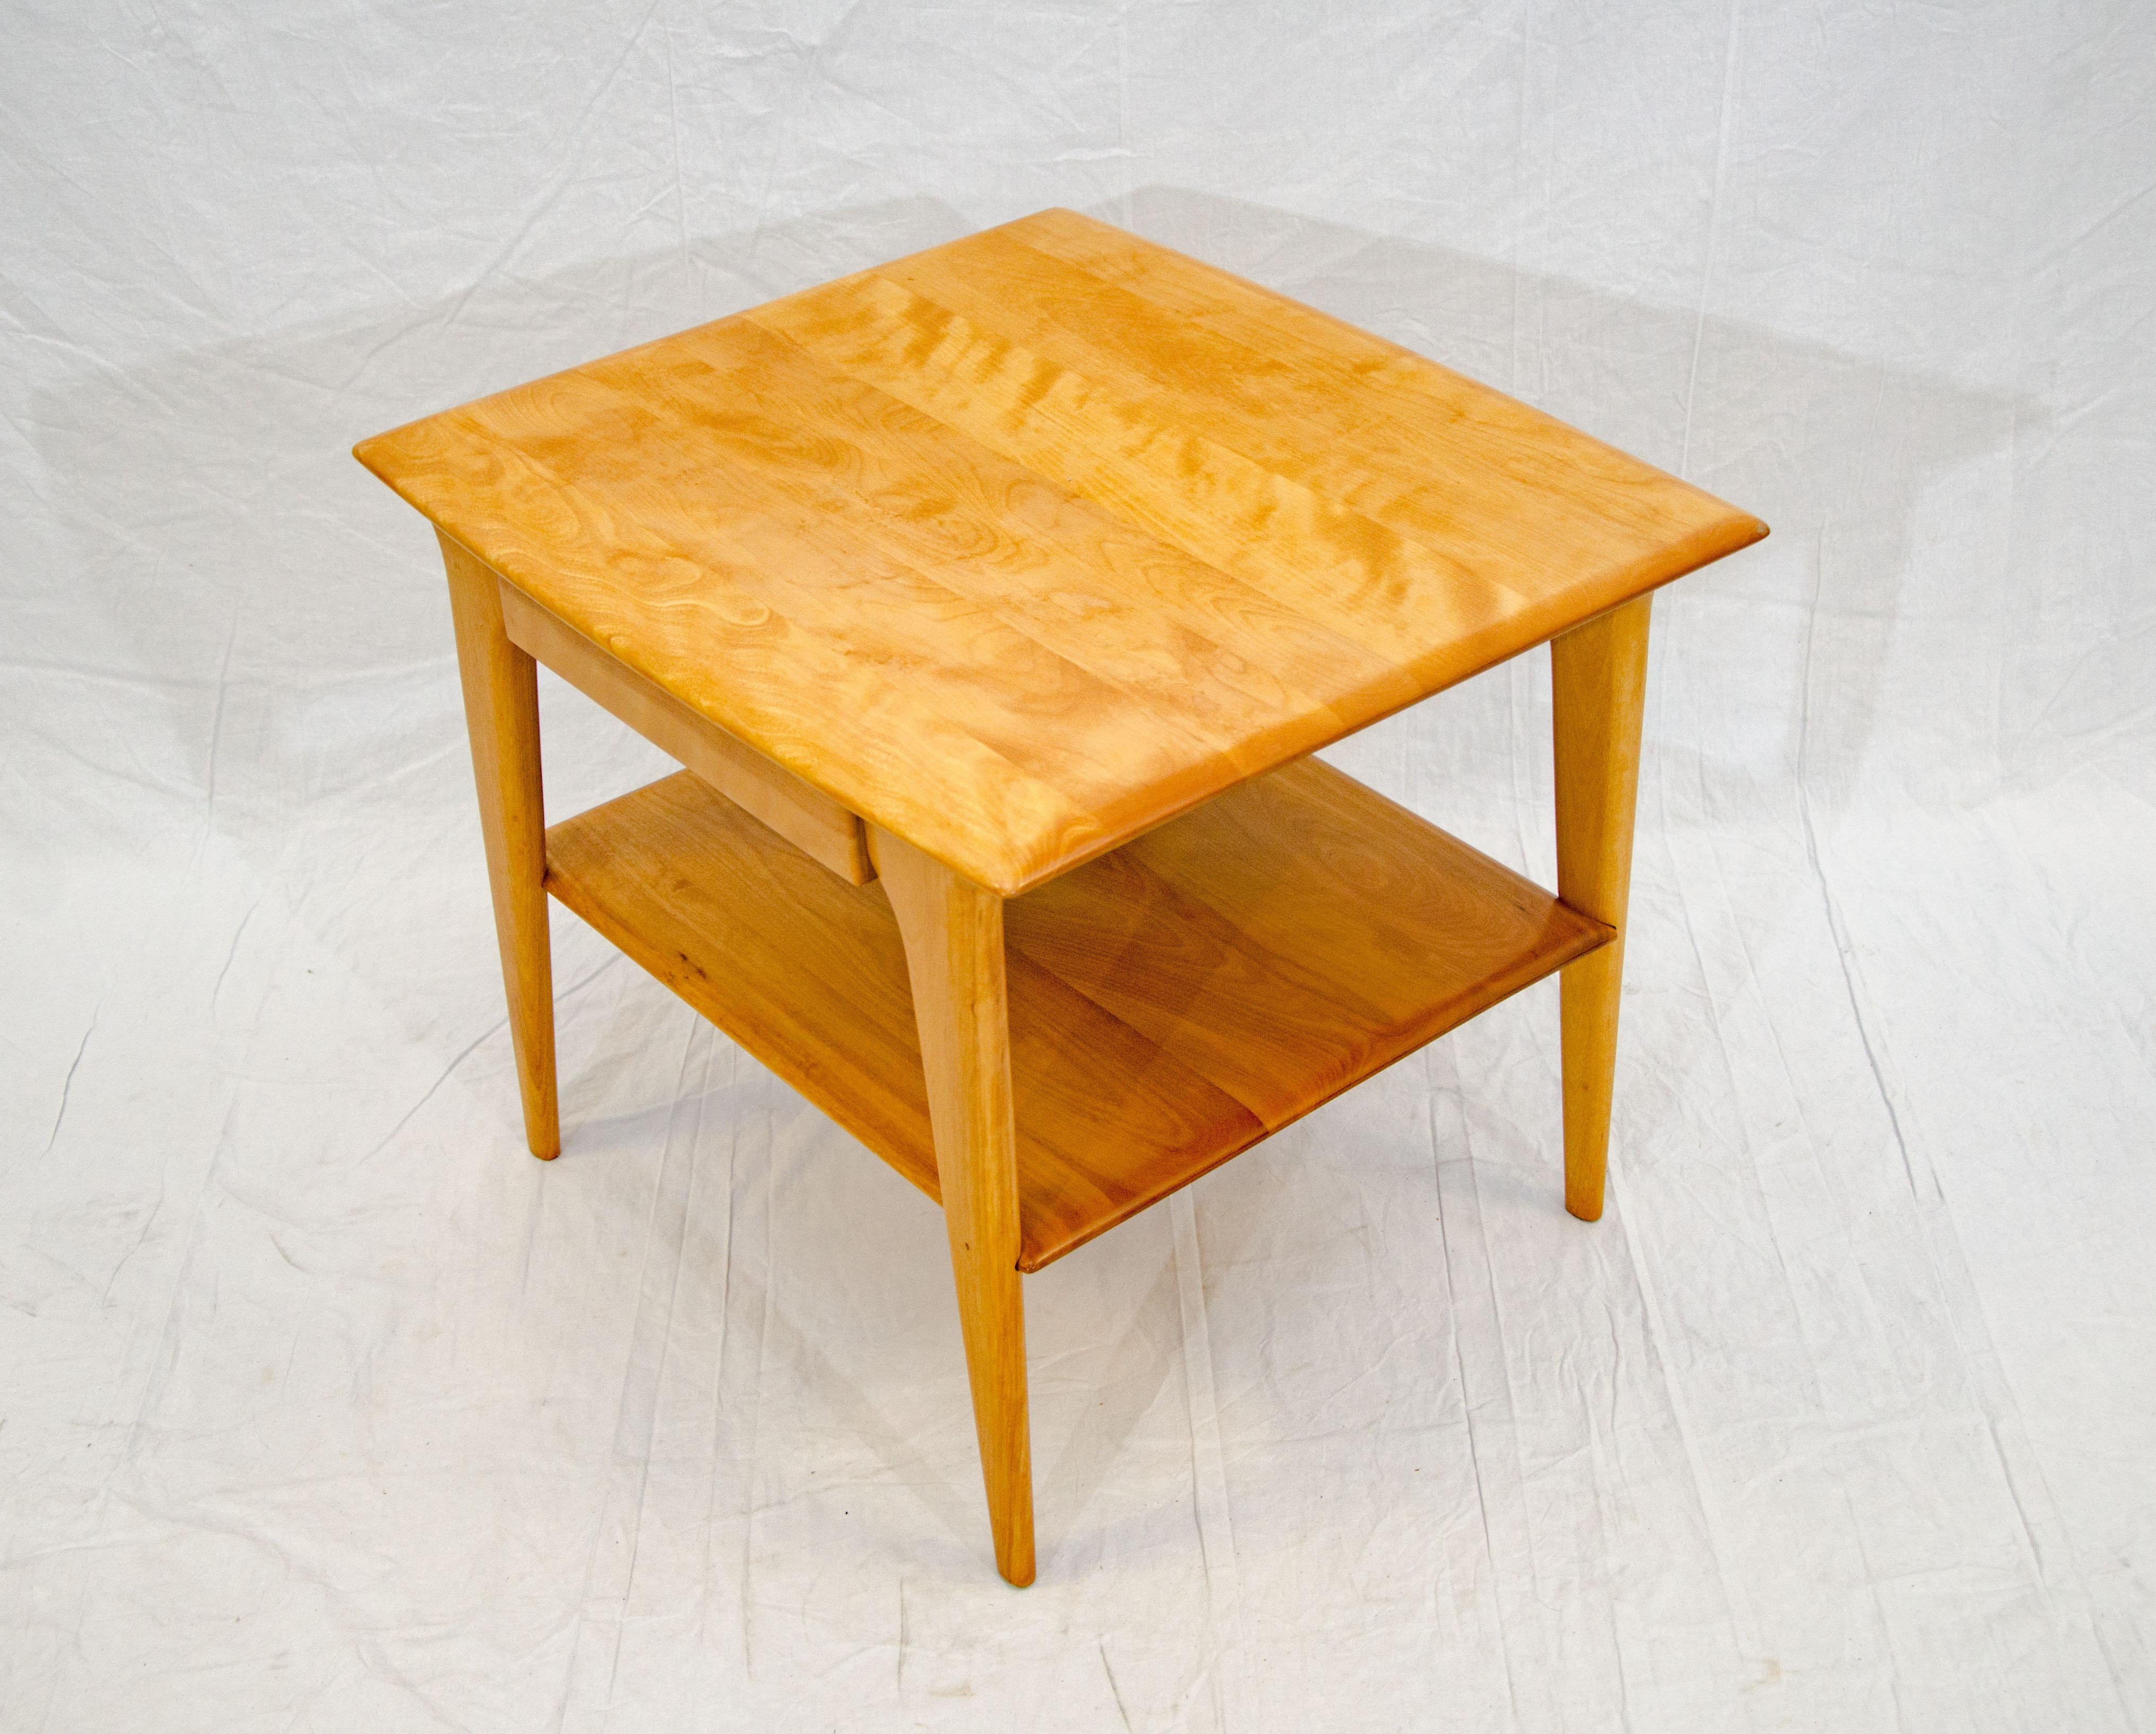 20th Century Vintage Heywood Wakefield Occasional / End Table with Drawer, M 1538 G